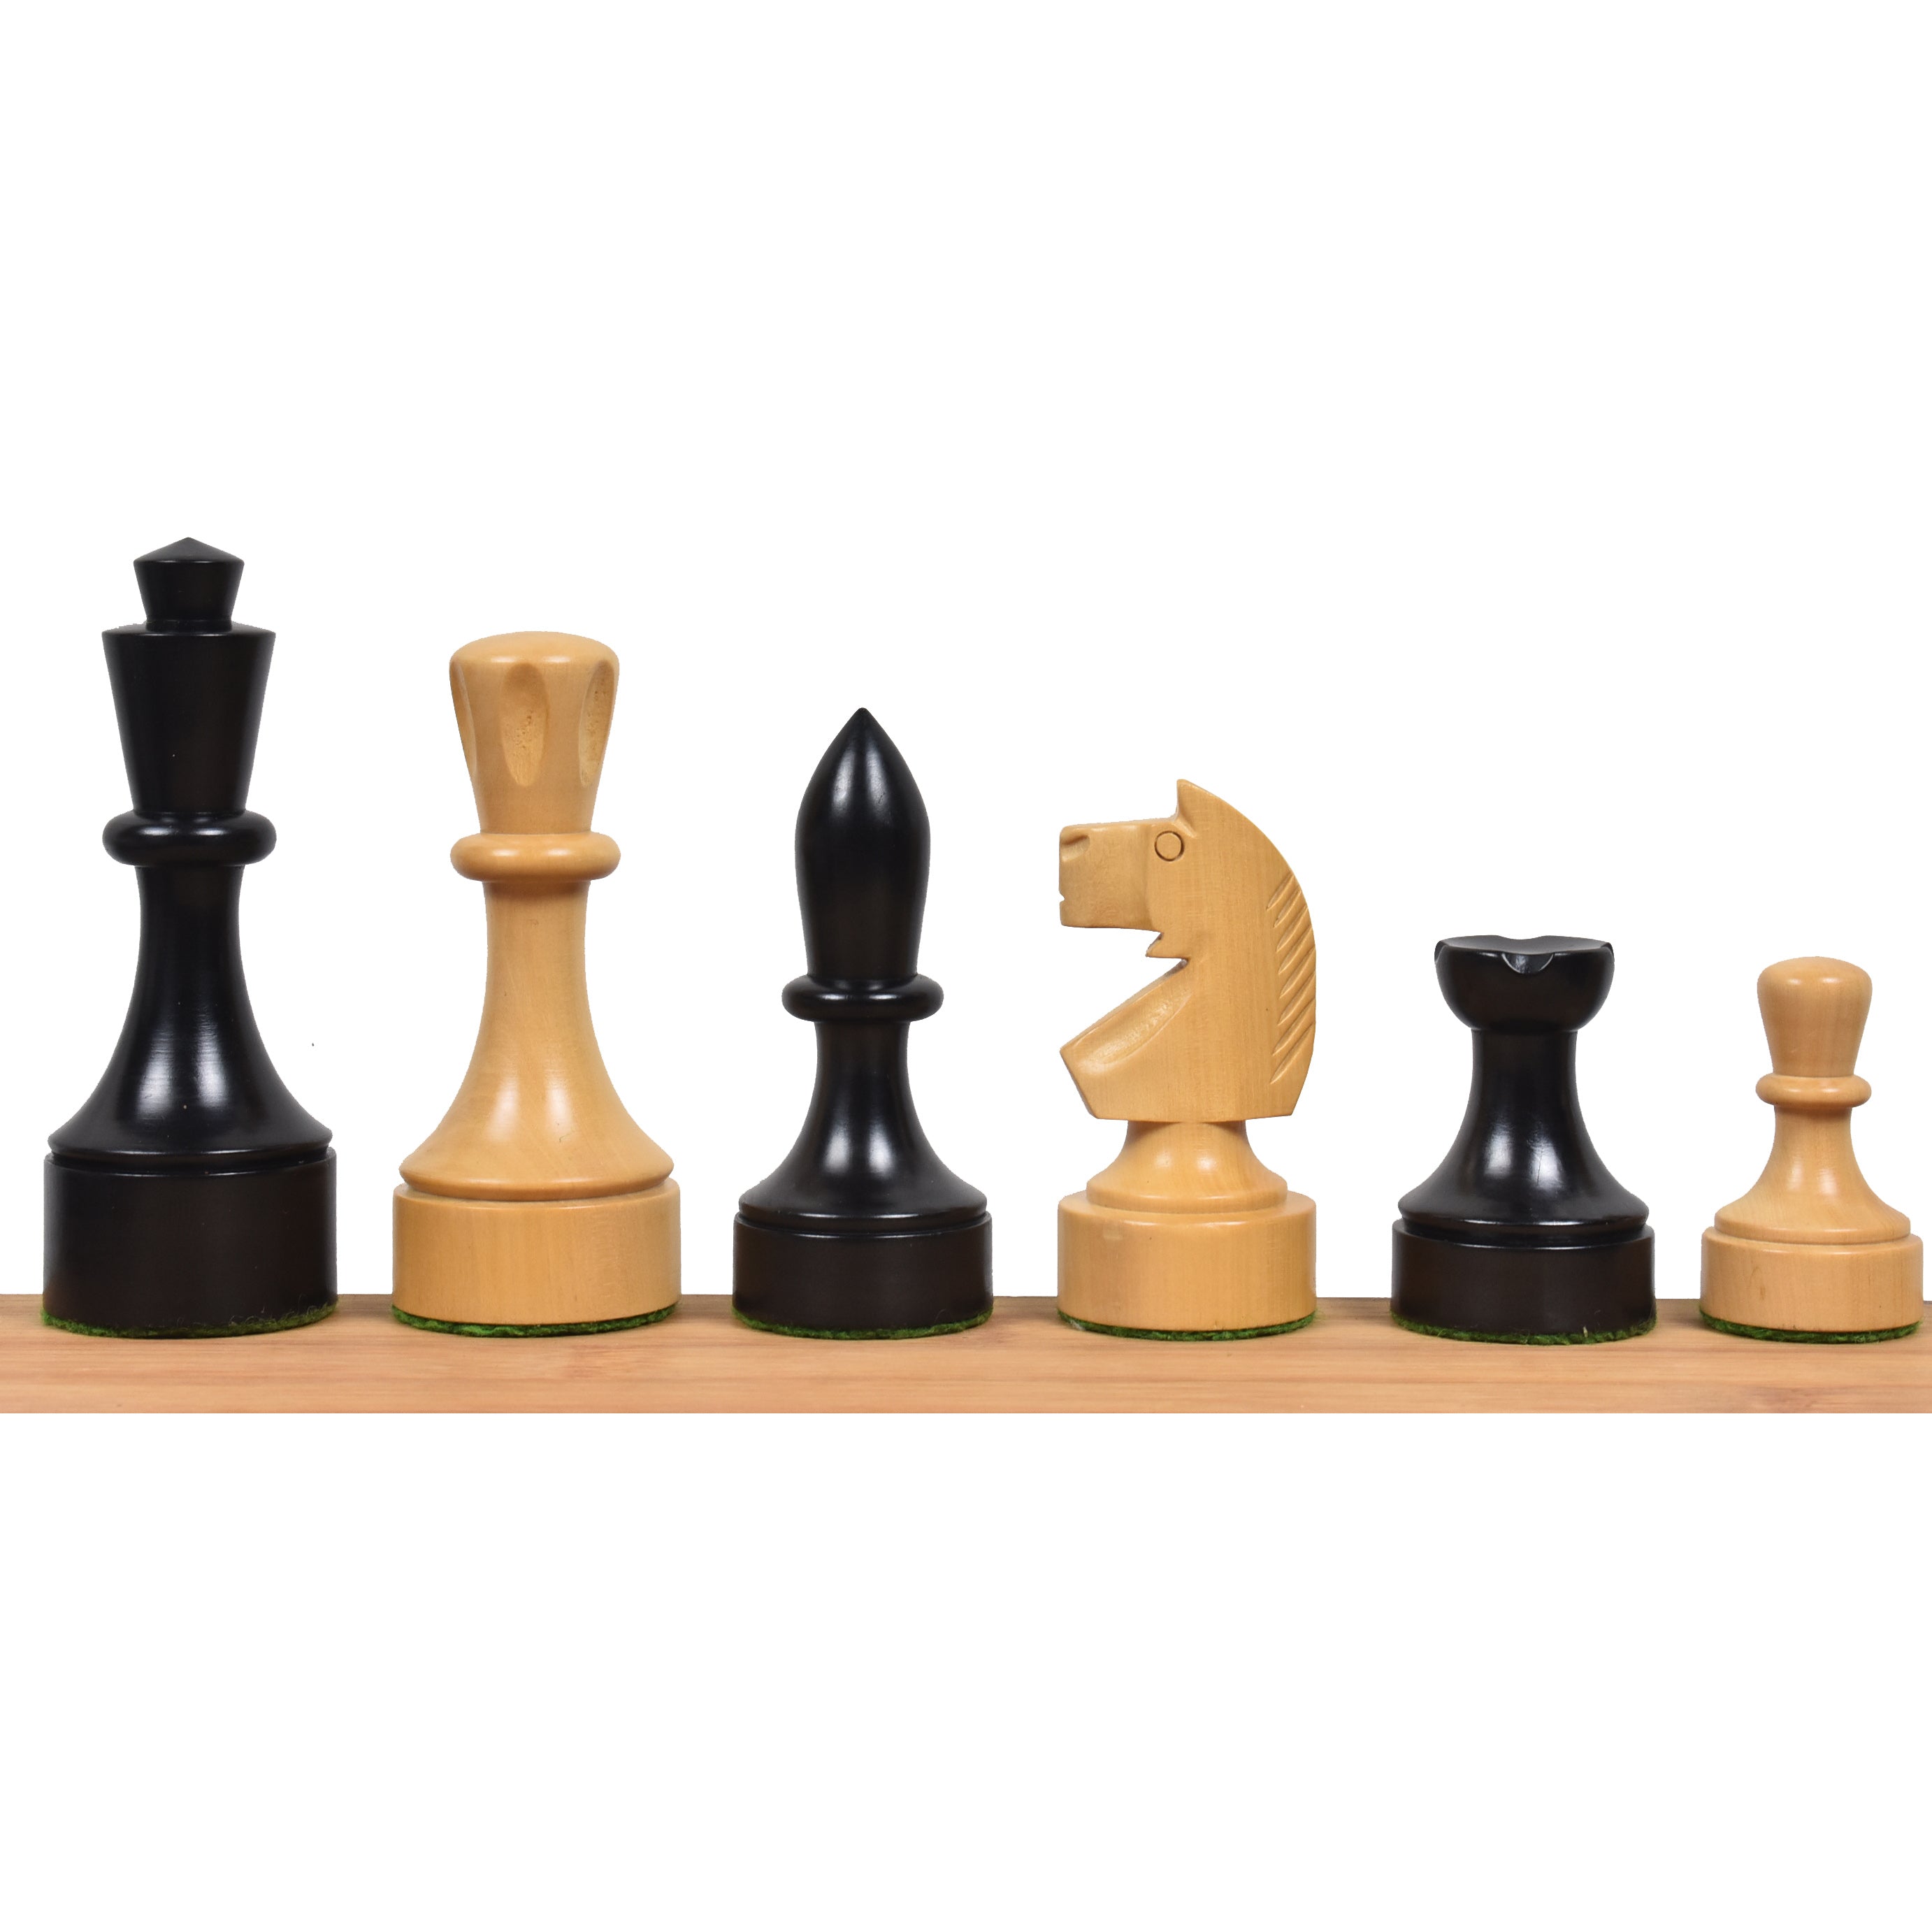 need BIGGER CHESS CLOCK!!! - Chess Forums 